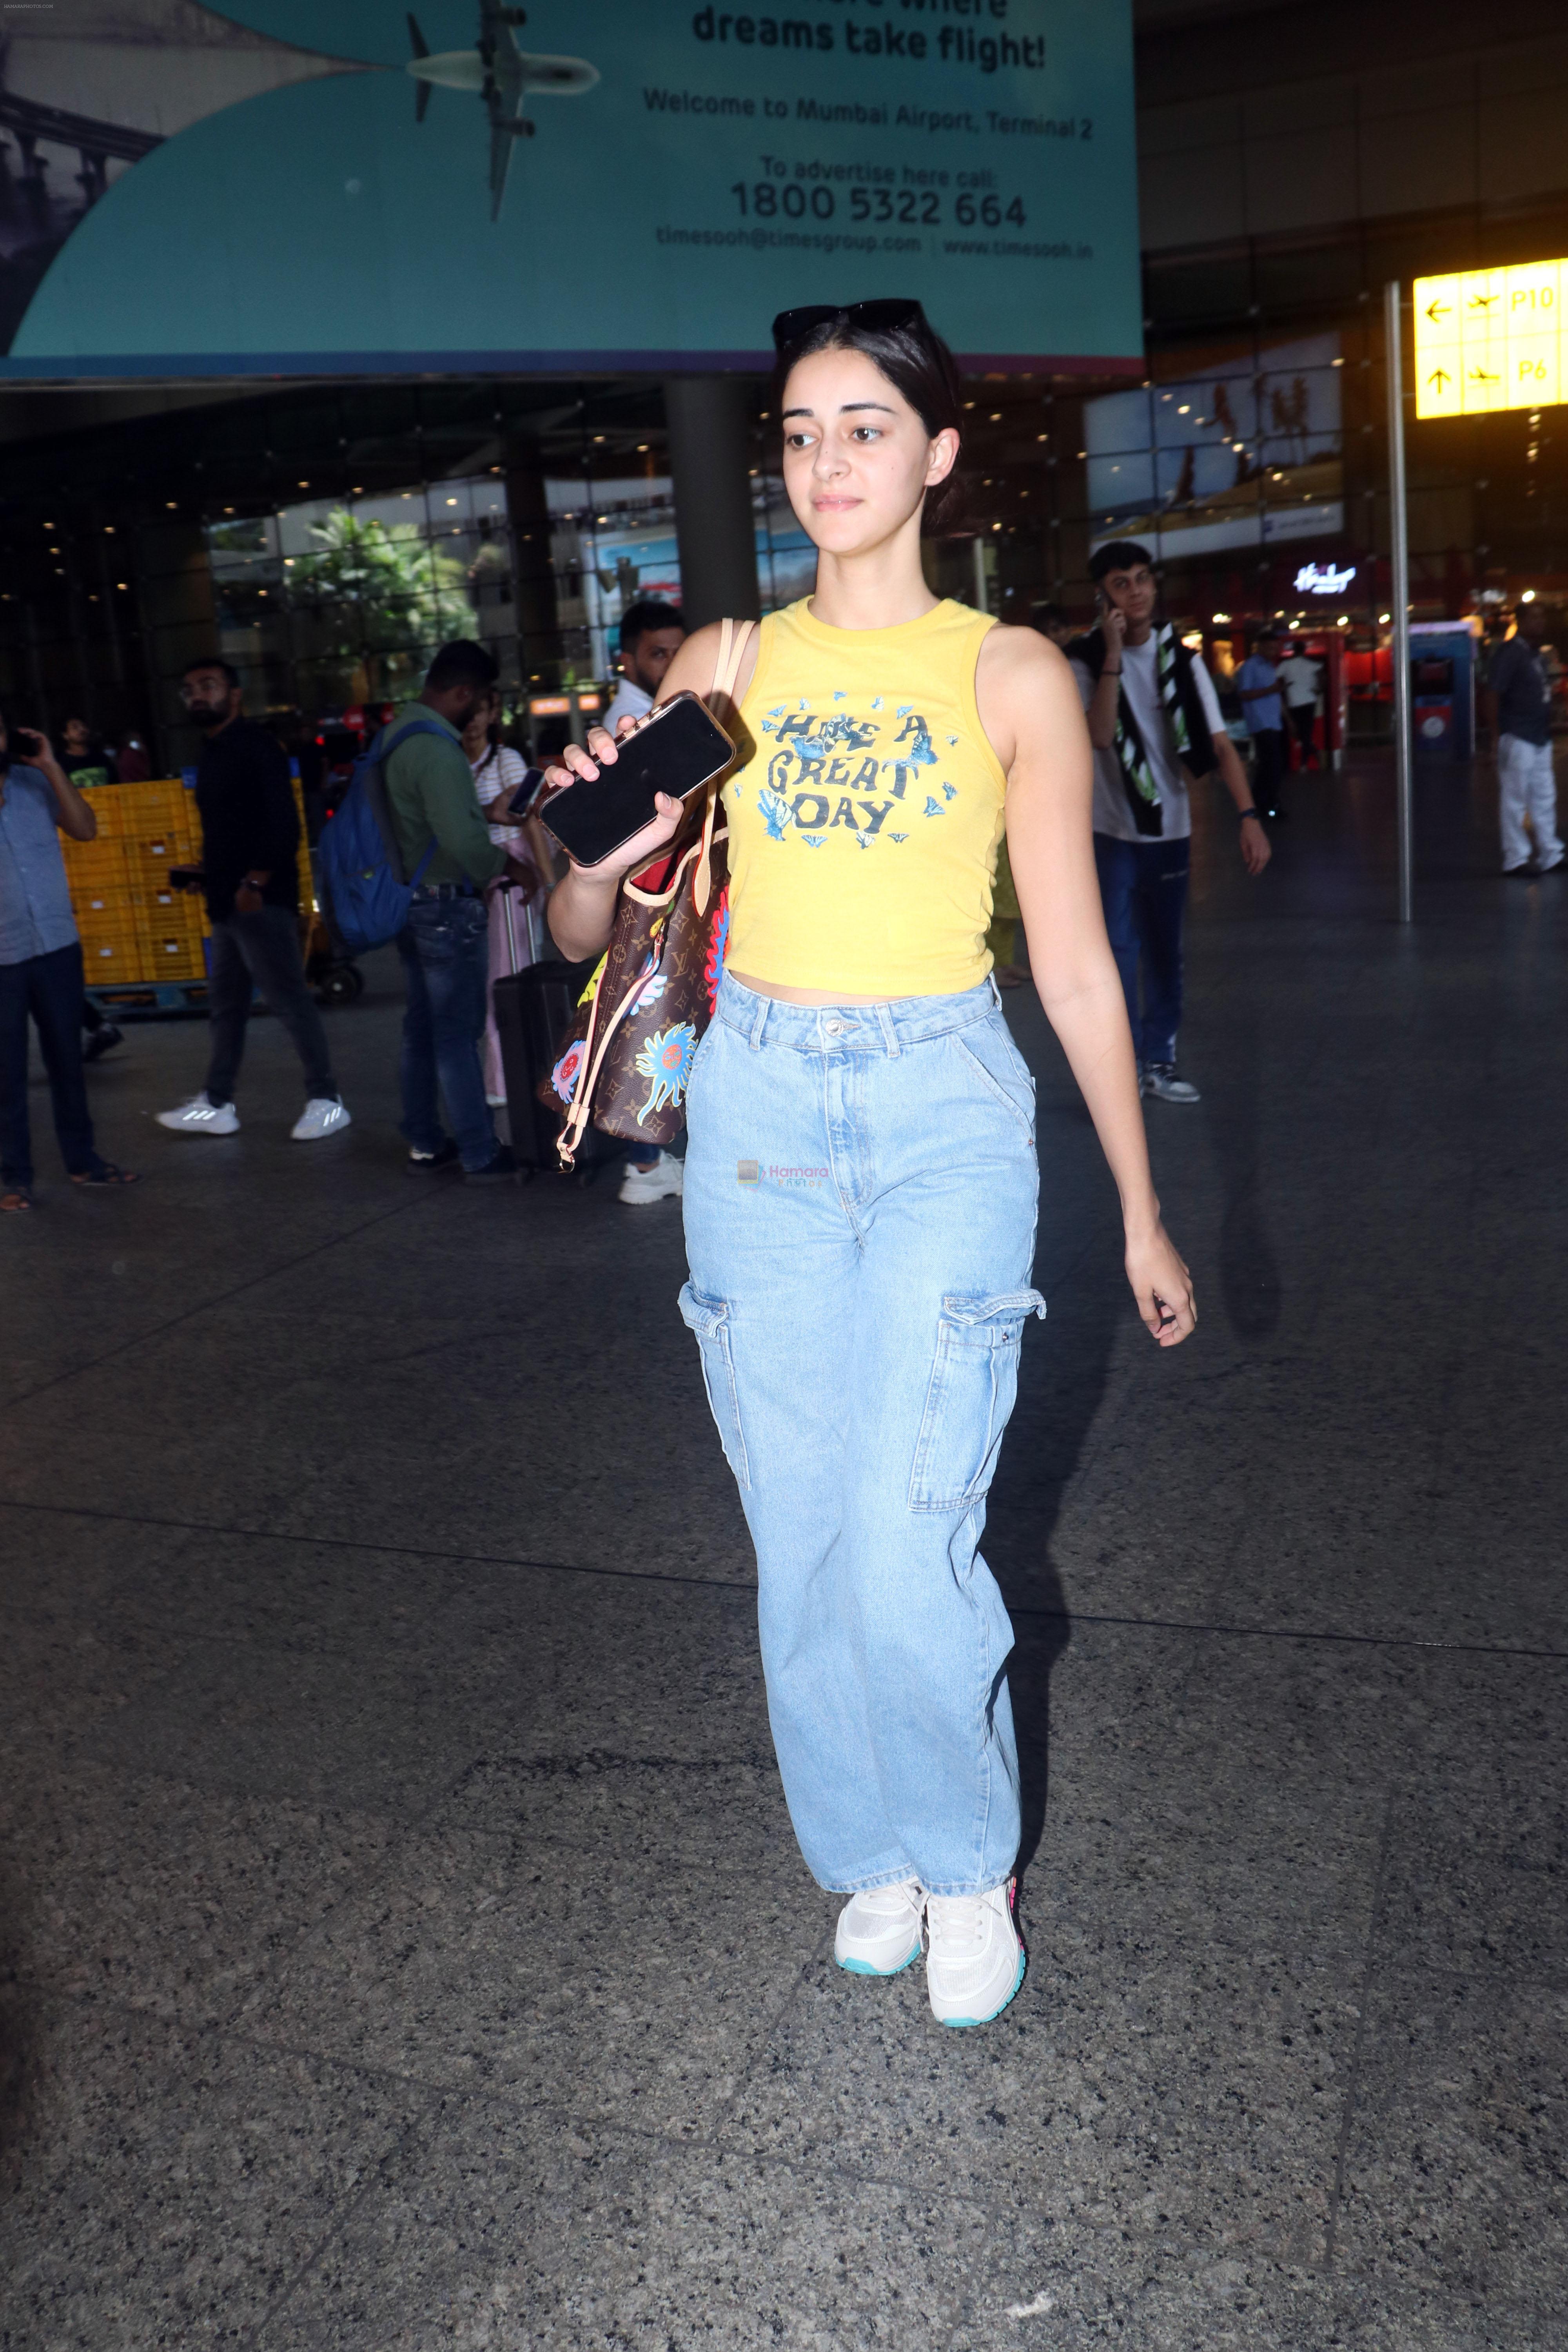 Ananya Panday in a Yellow tank top and blue jeans on 23rd May 2023